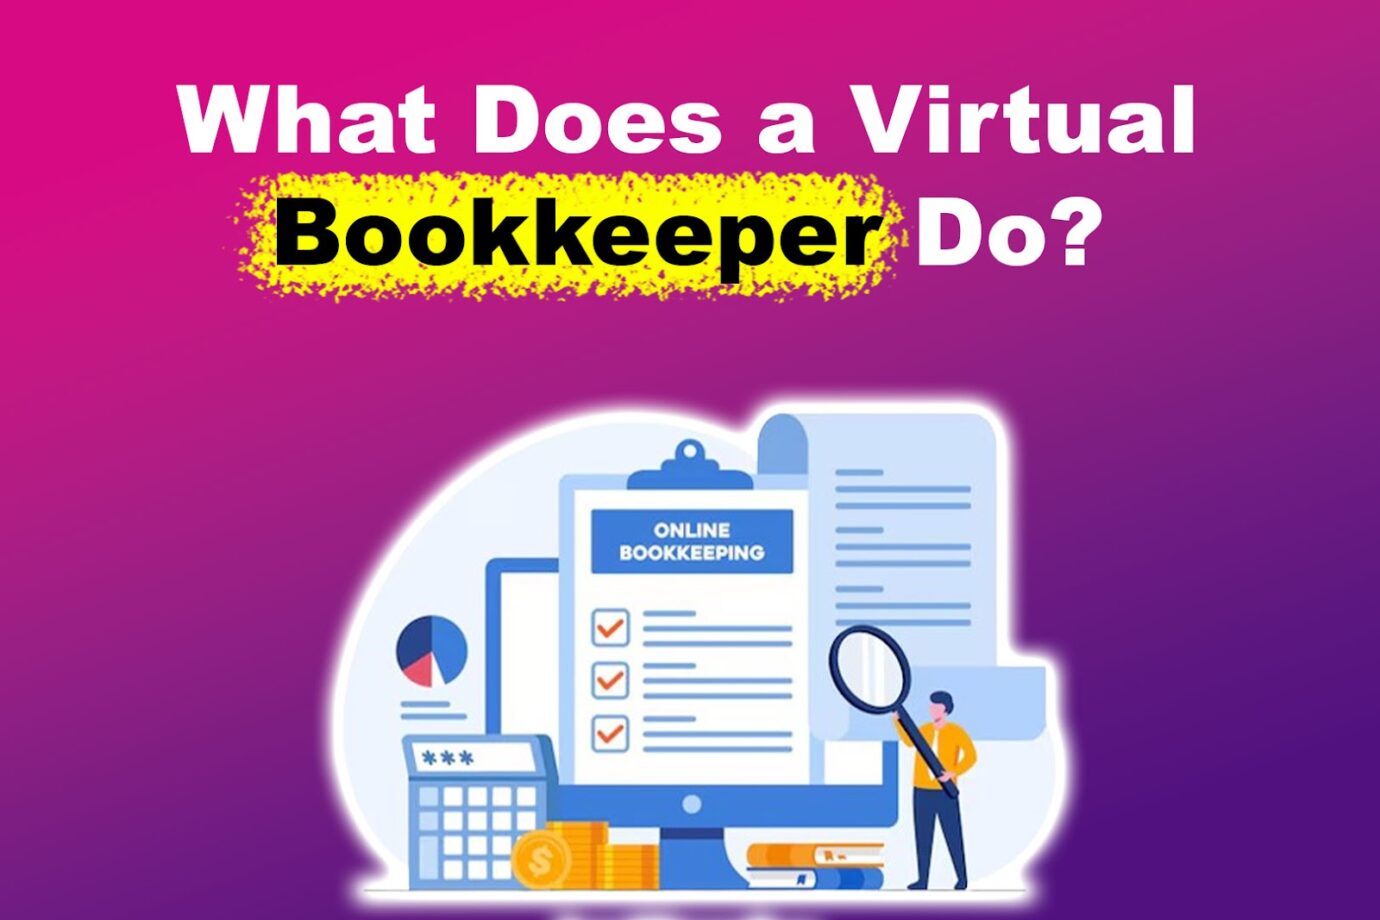 What Does a Virtual Bookkeeper Do